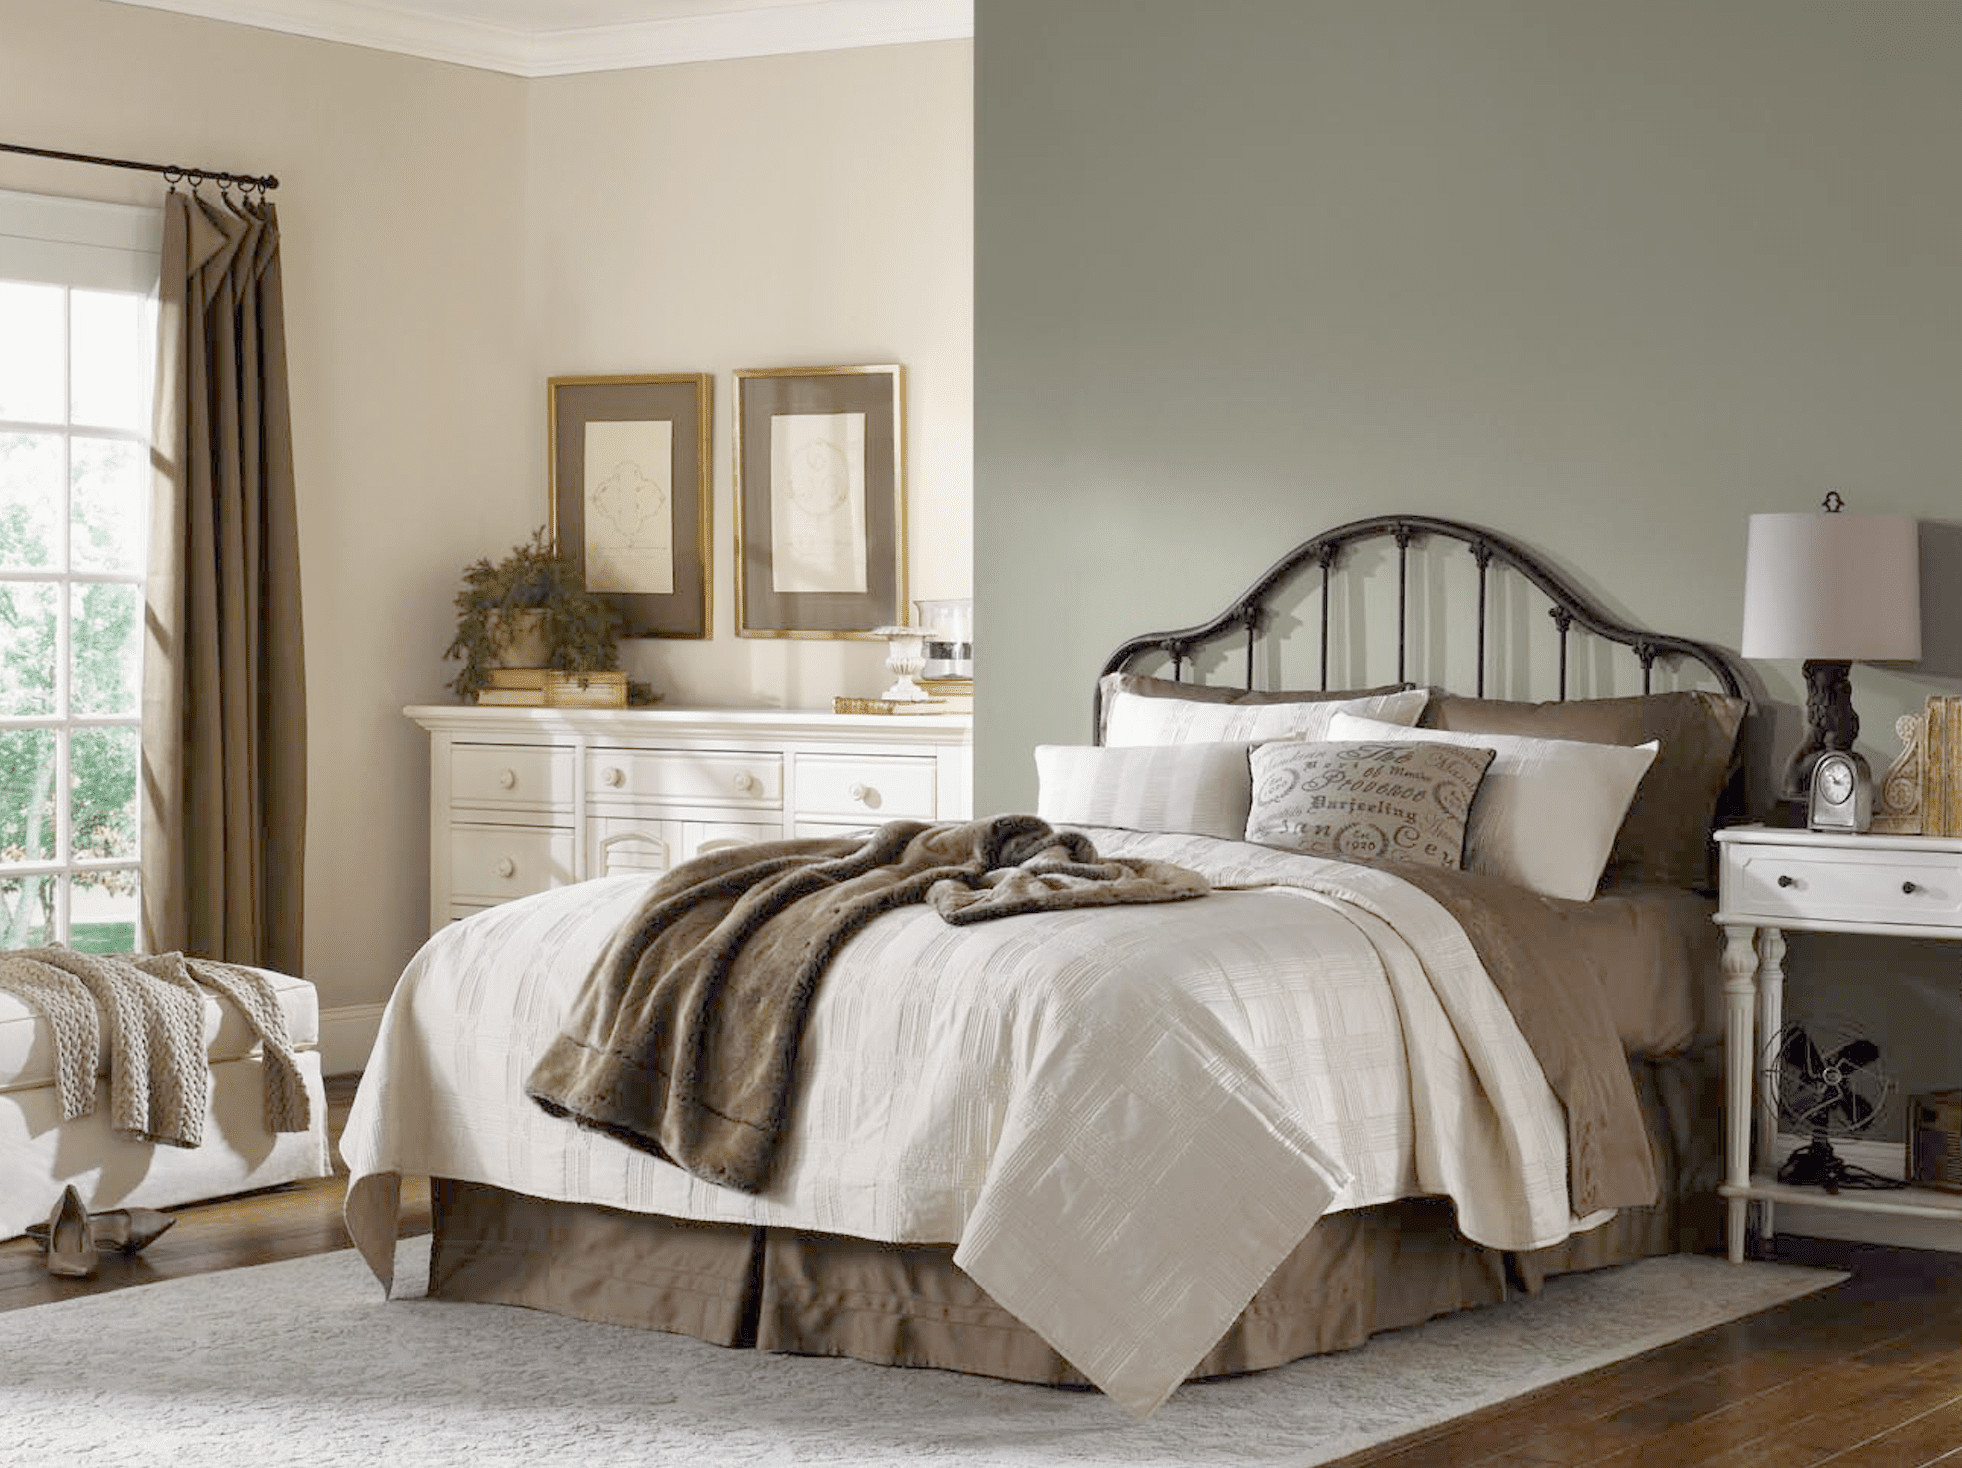 Bedroom Paint Color
 8 Relaxing Sherwin Williams Paint Colors for Bedrooms